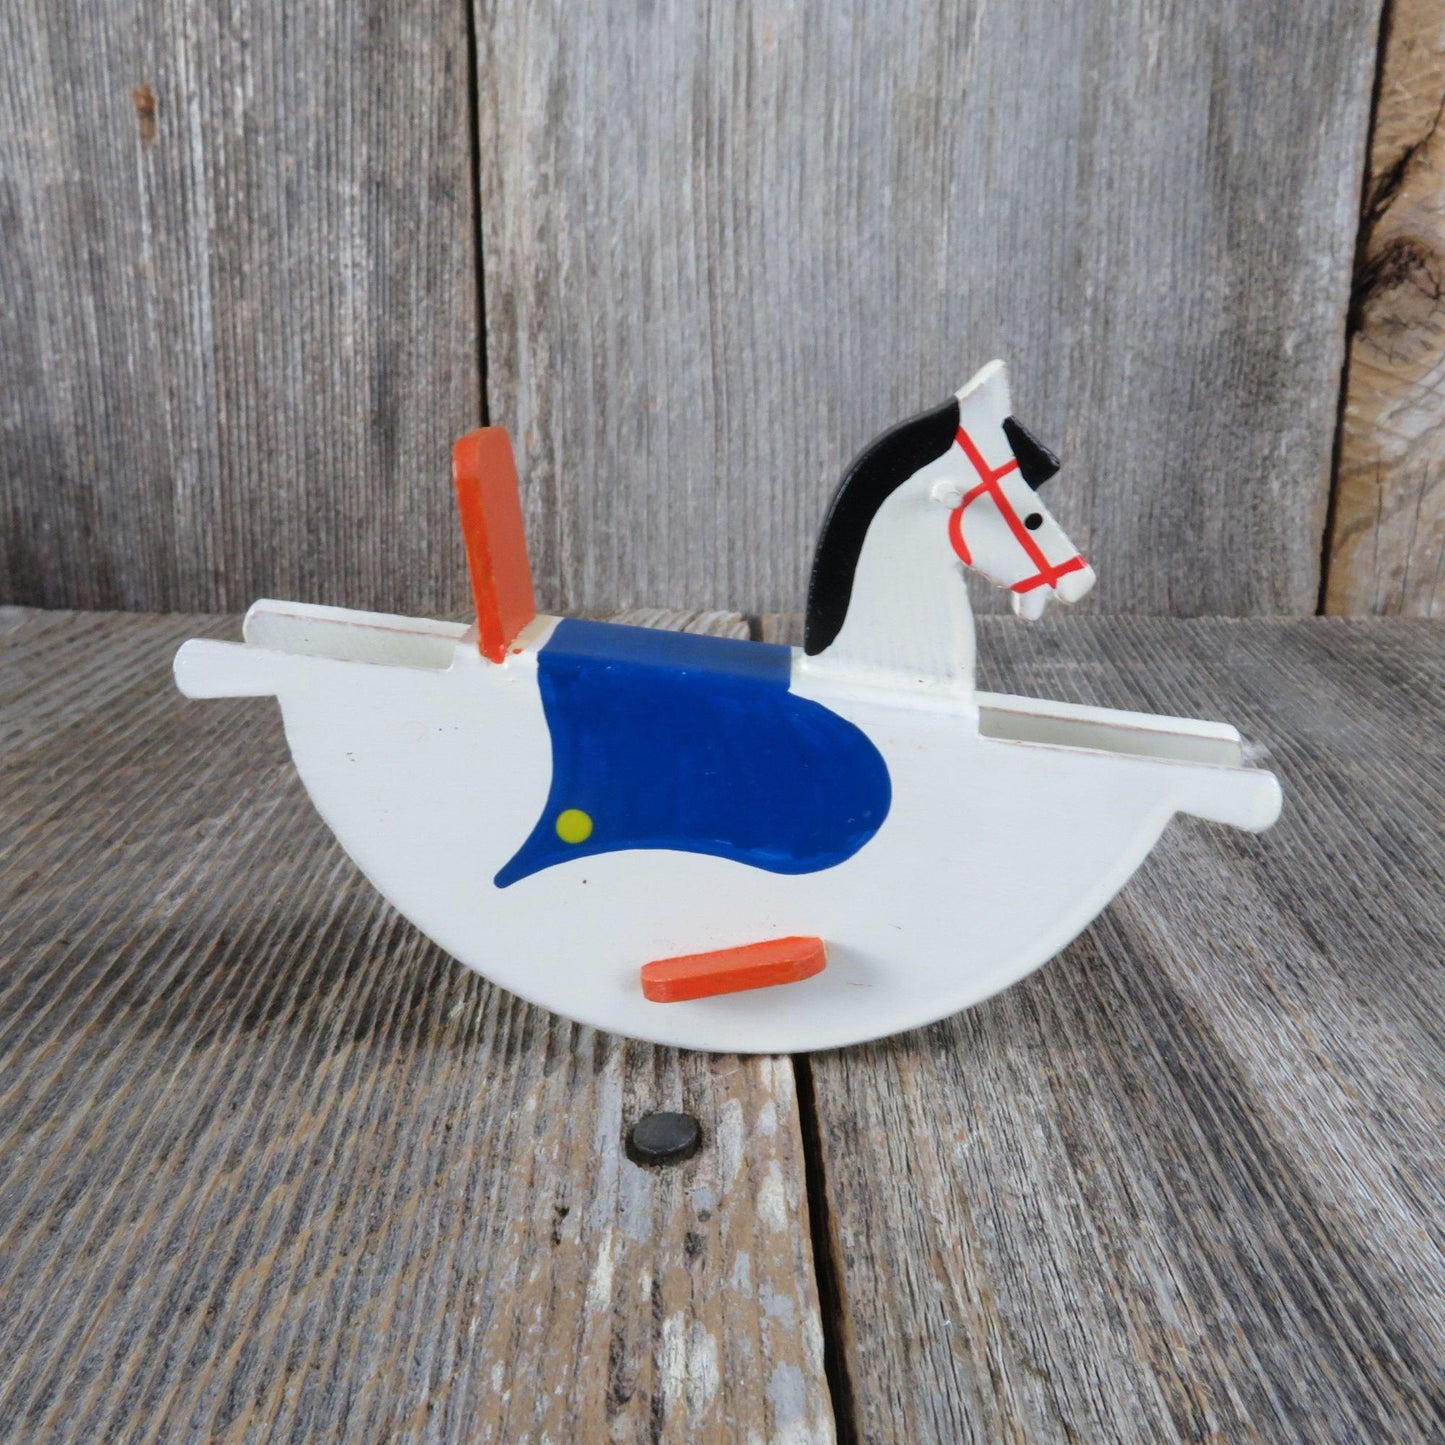 Vintage Miniature Wooden Rocking Horse Toy Figurine White Blue Wood Made in Germany